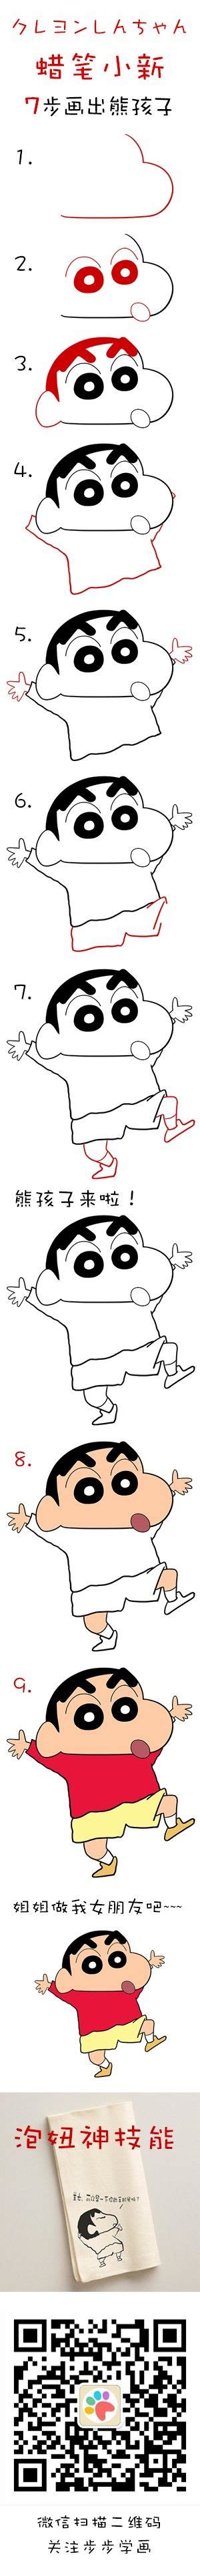 Coloring pictures on shinchan crayon coloring pages crayon shin chan coloring pages kids coloring pages. 6c1b91a55d6ecdd9b2874c8df2d32b9e.jpg (300×3872) (With ...